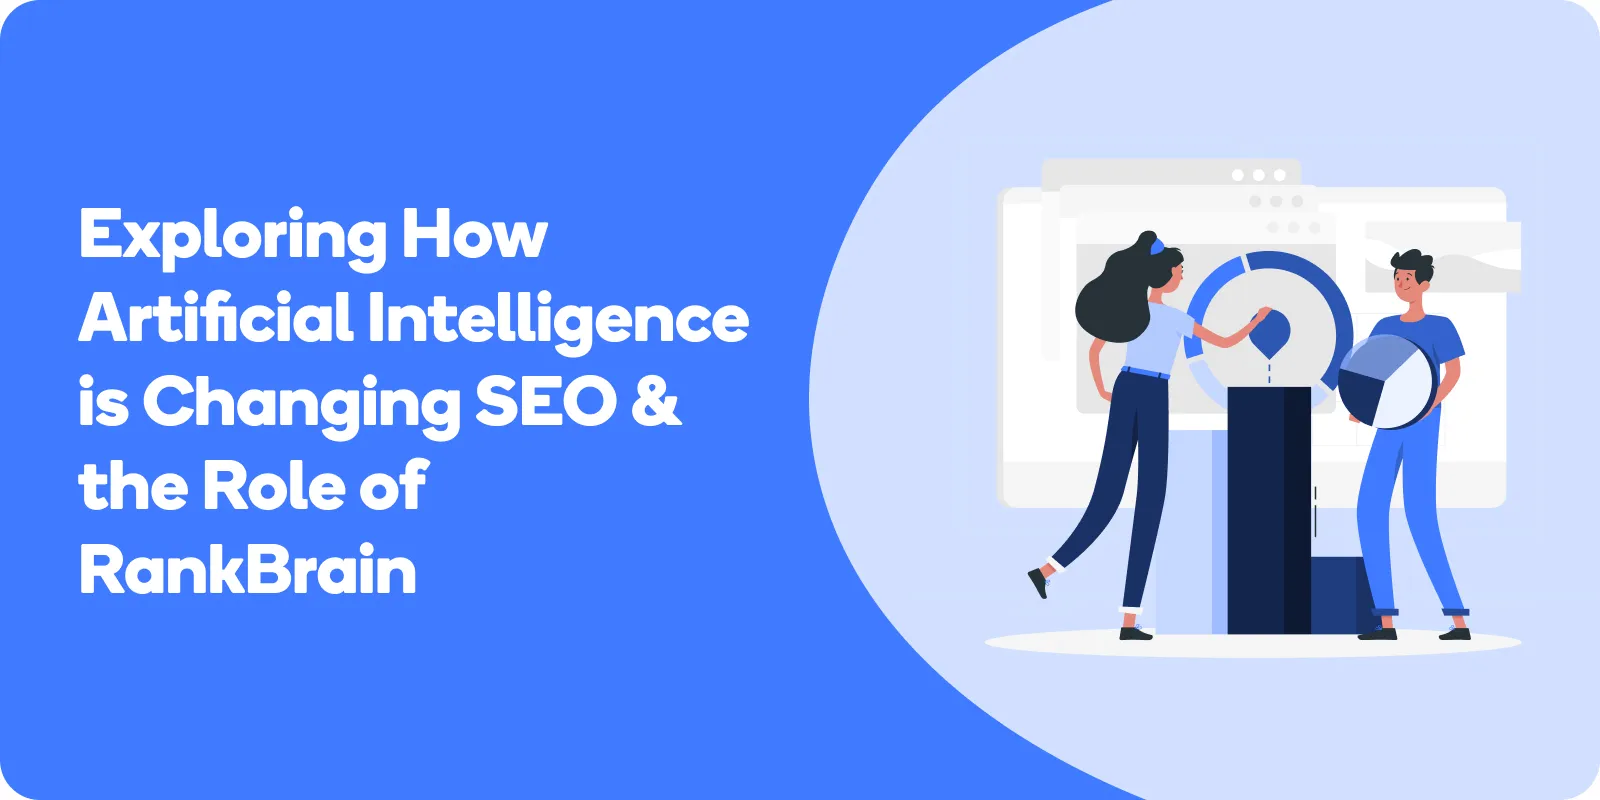 Exploring-How-Artificial-Intelligence-is-Changing-SEO-the-Role-of-RankBrain